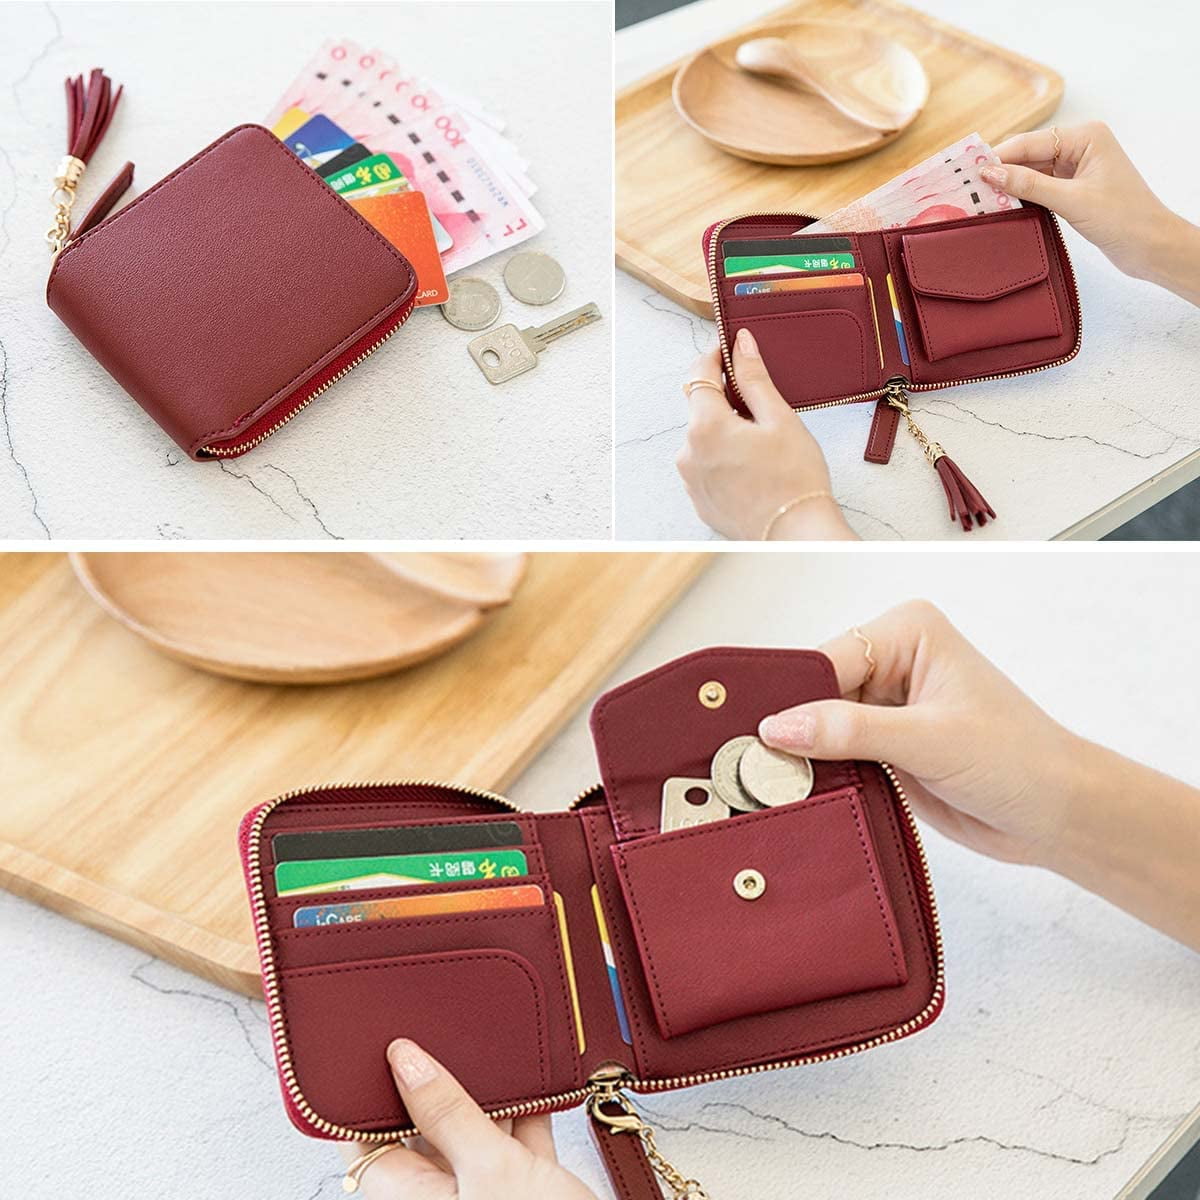 Womens William Polo Wallet | Womens Leather Wallet Bee | Wallet Williampolo  Women - Wallets - Aliexpress